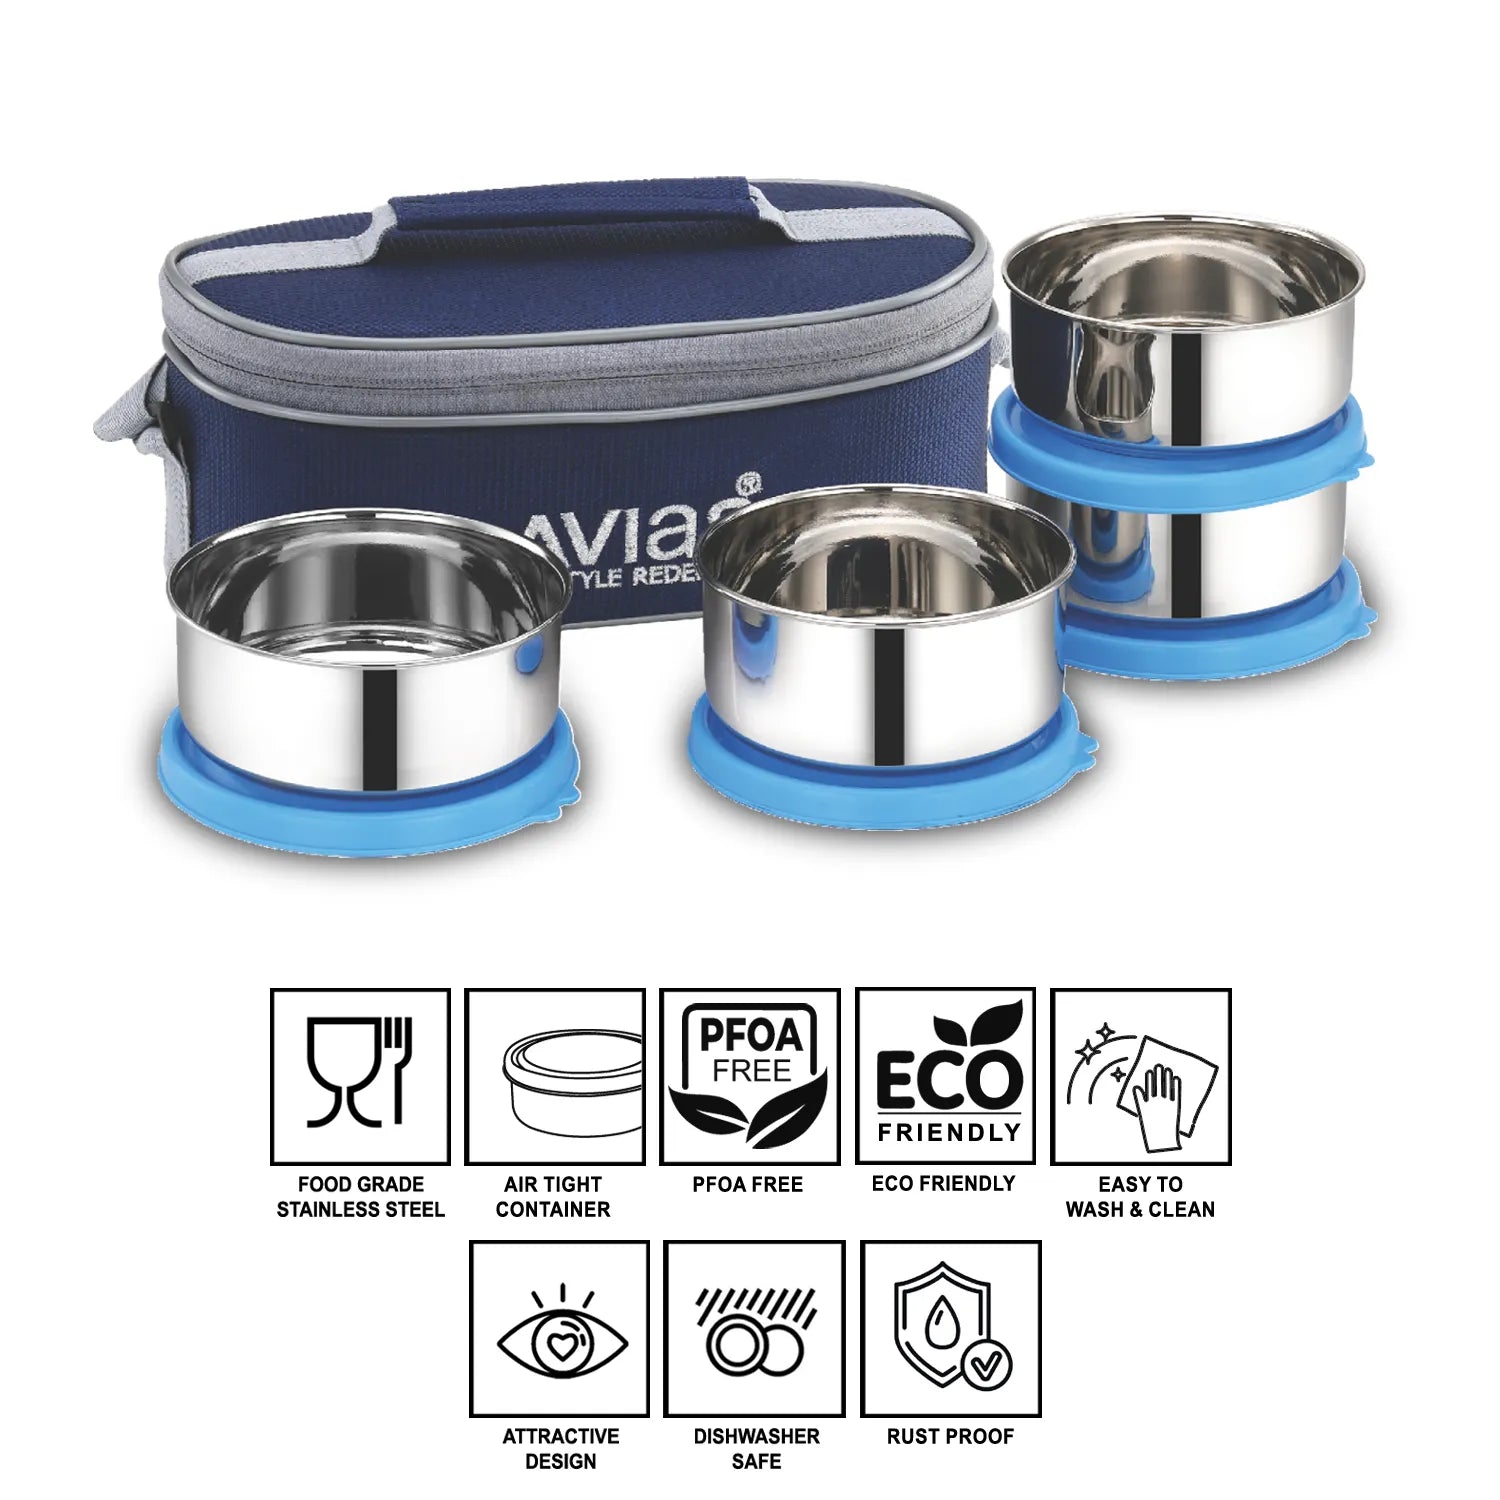 Avias Stainless Steel Lunch Box for Kids Will Keep Food Warm